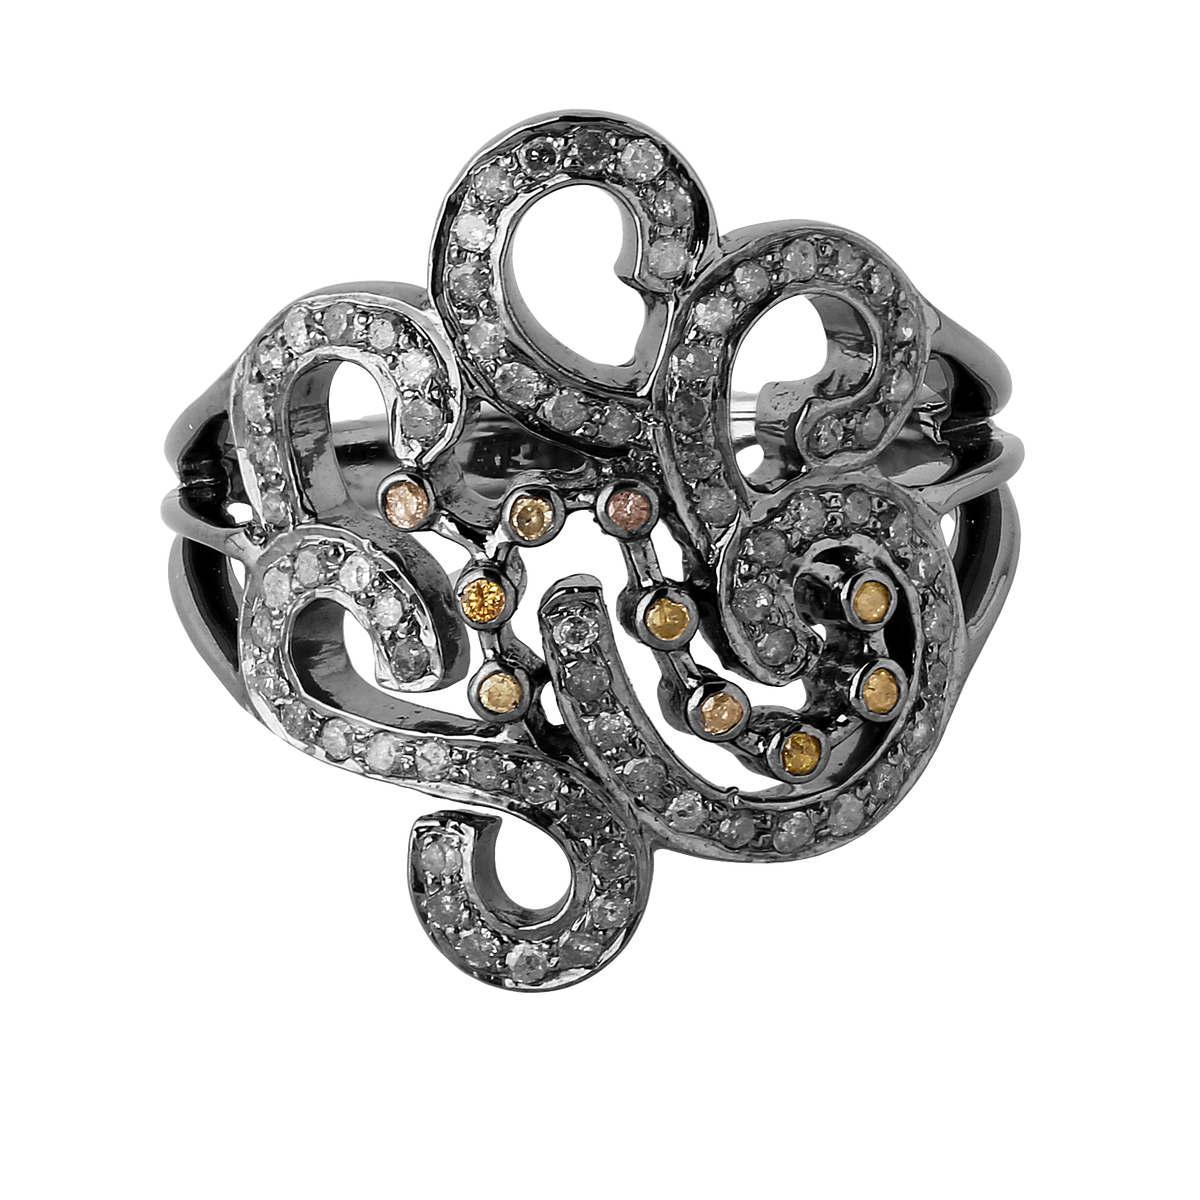 SILVER SNAKE BIG RING WITH ROSECUT DIAMONDS